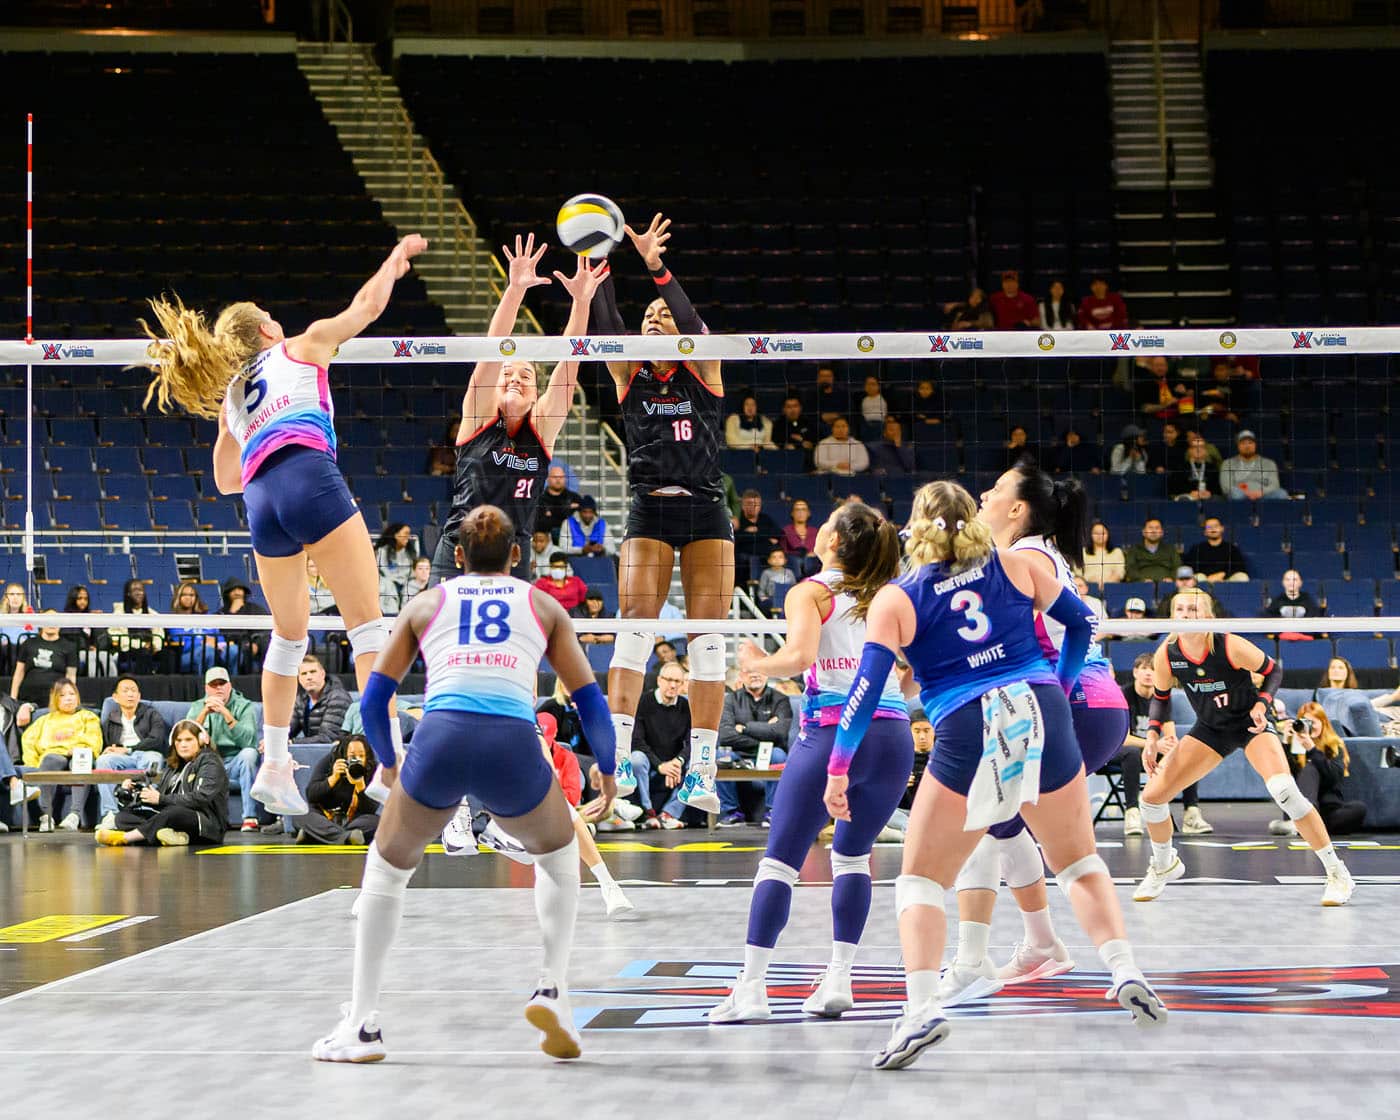 This is the first year for the Pro Volleyball Federation, and the Atlanta Vibe is one of seven teams in the league.